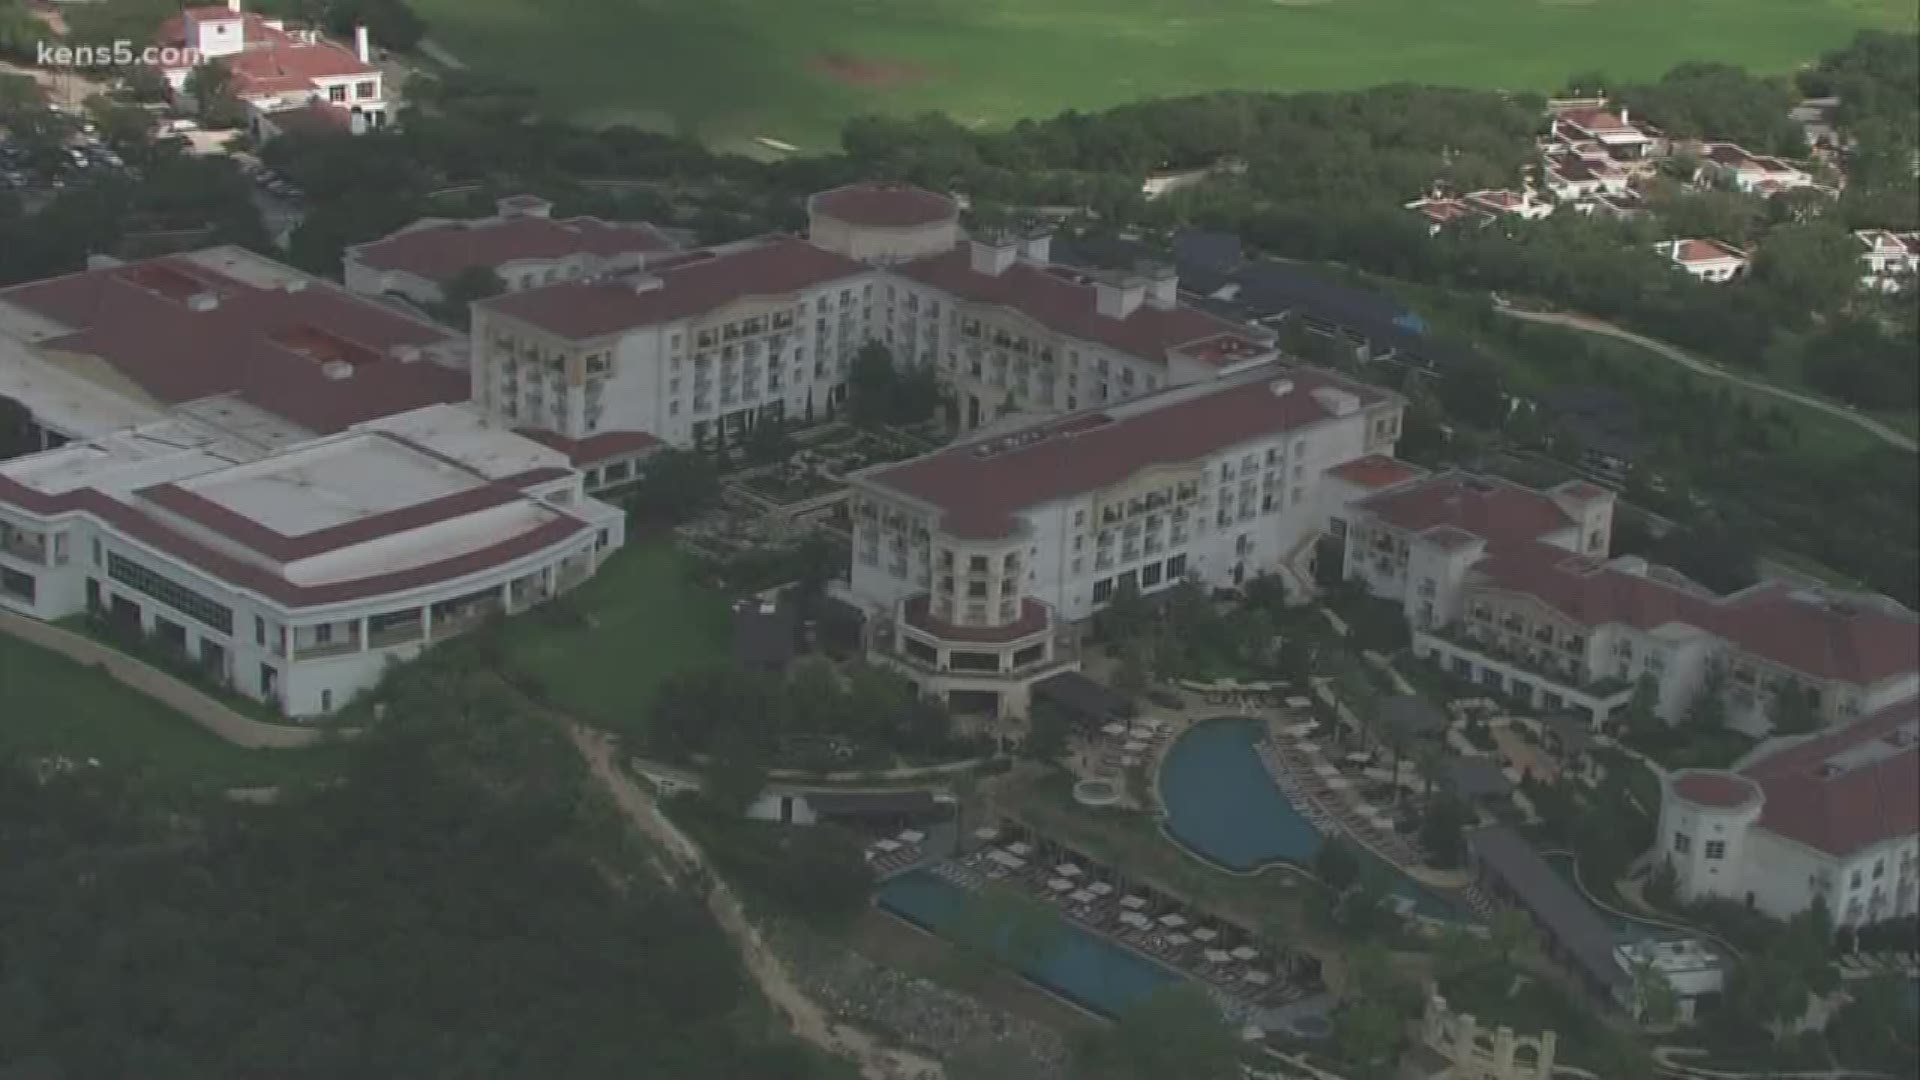 The La Cantera Hill Country Resort faces a multi-million dollar lawsuit for discrimination. Eyewitness News reporter Adi Guajardo spoke with former employees who claim they were banned from speaking Spanish while on the job.